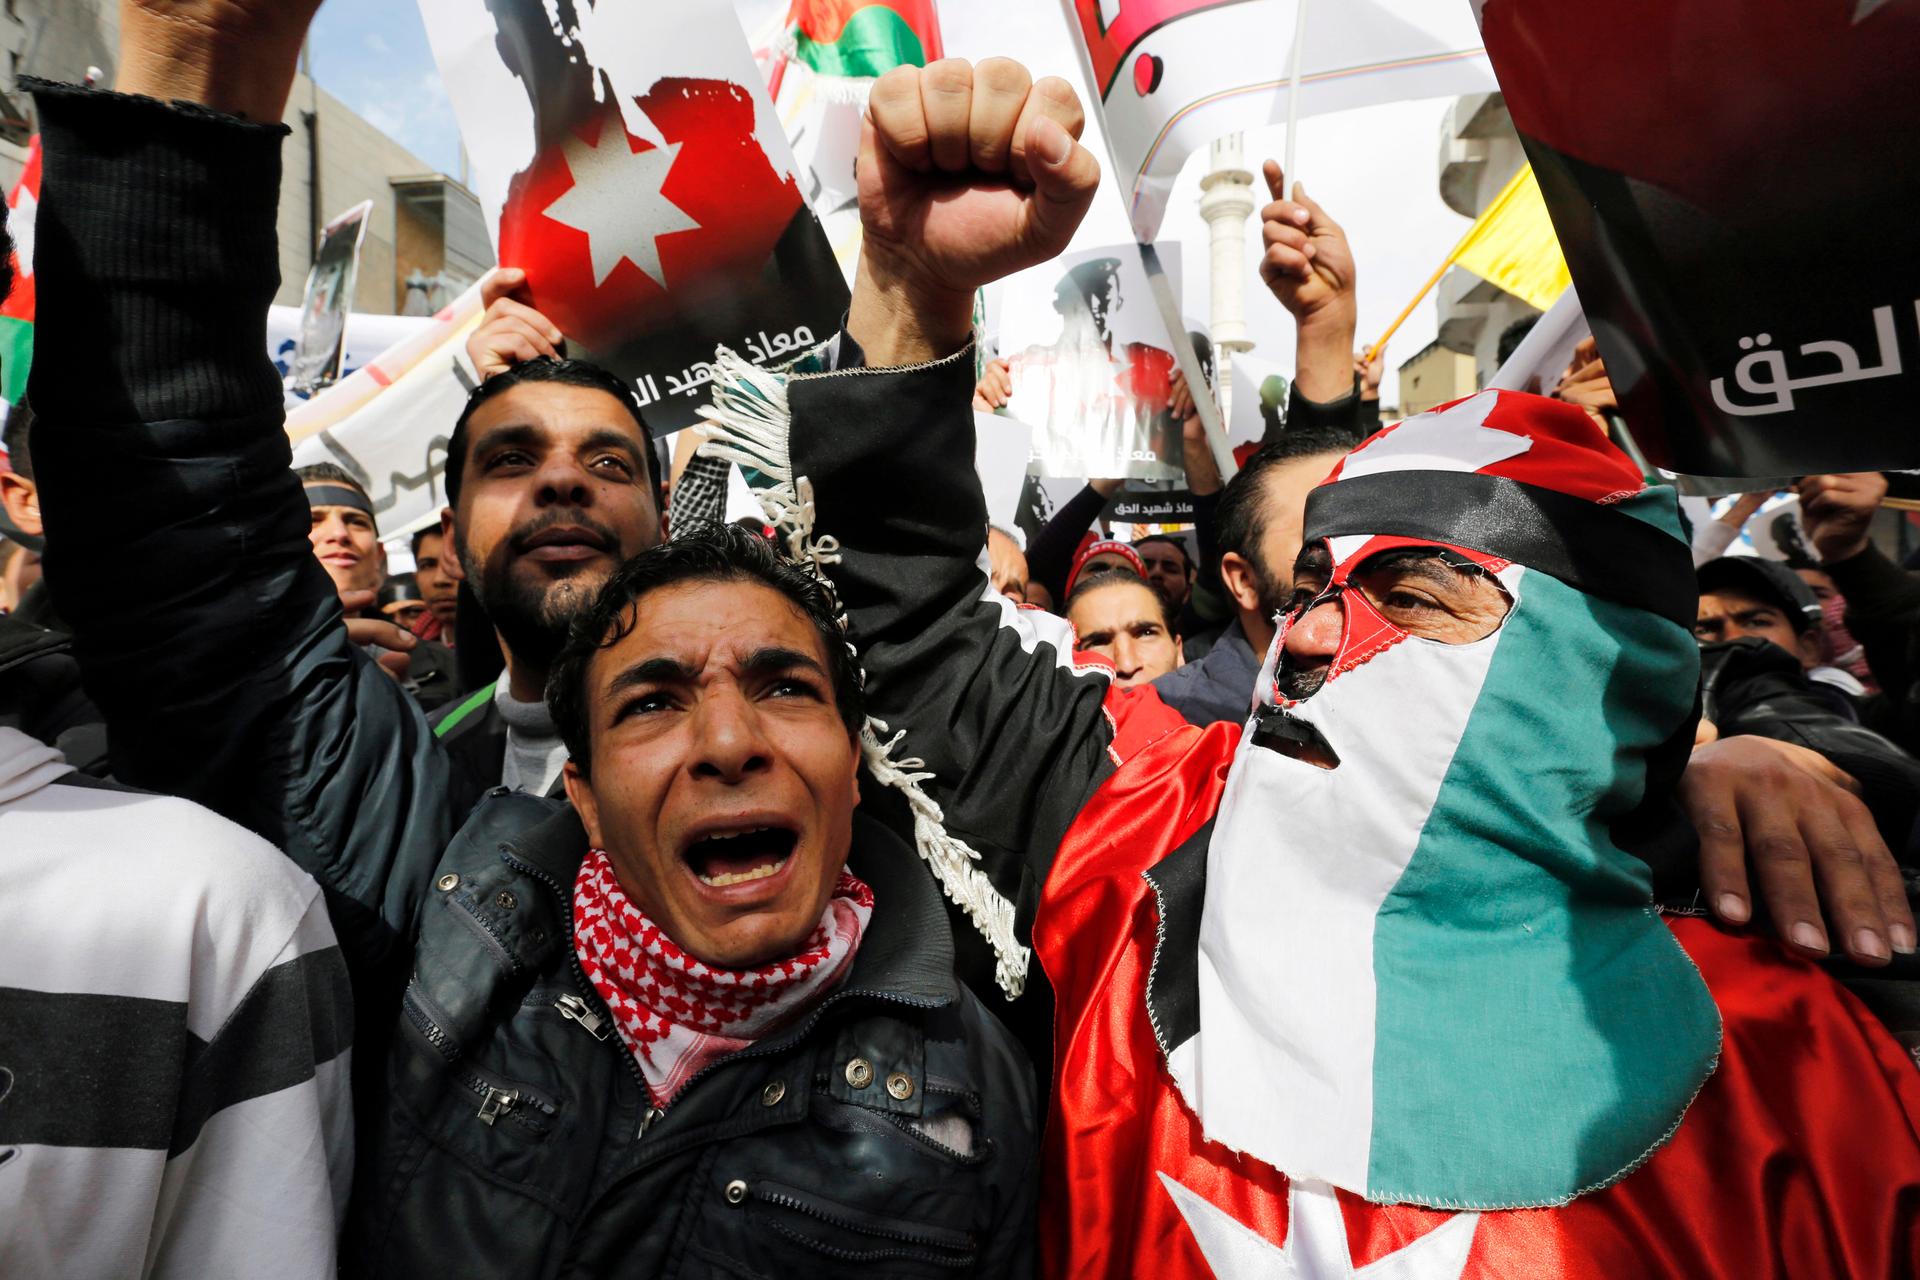 A protester dressed in a Jordanian flag joins others as they hold up pictures of Jordanian King Abdullah and Jordanian pilot Muath al-Kasaesbeh, while chanting slogans during a march after Friday prayers in downtown Amman February 6, 2015.